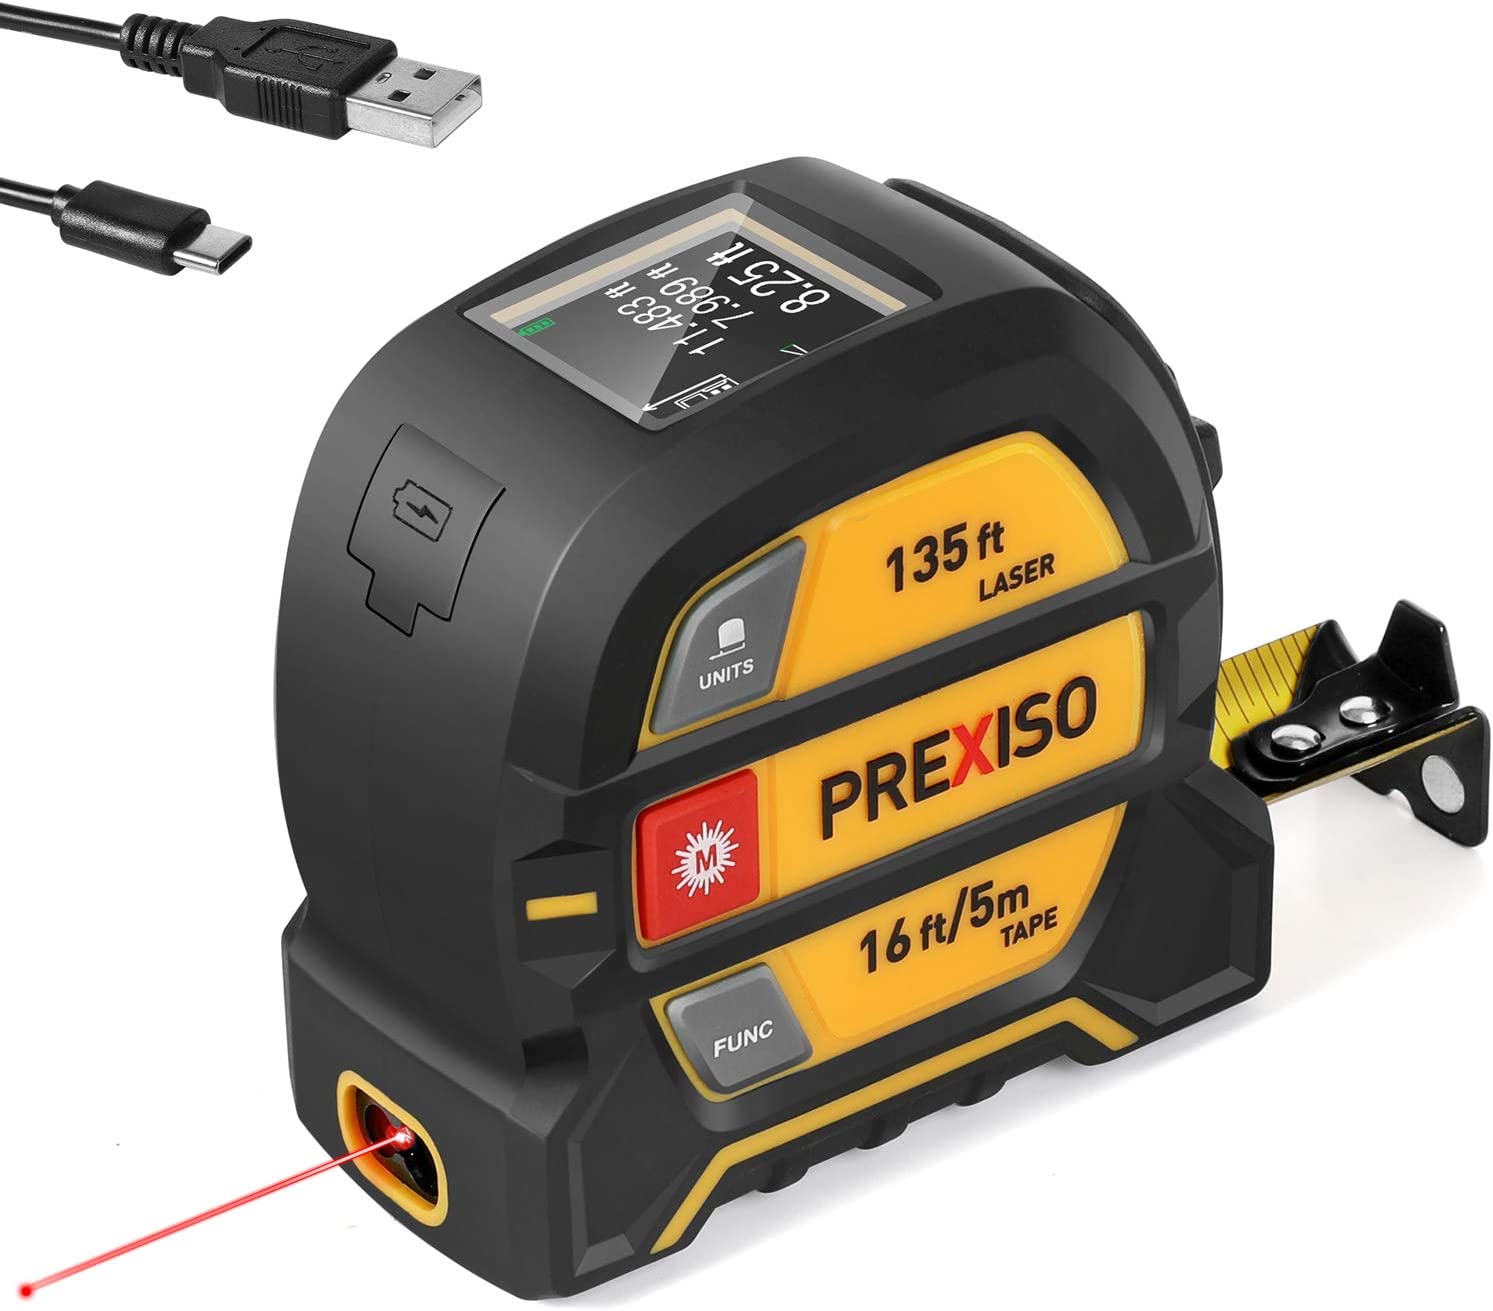 PREXISO 2-in-1 Laser Tape Measure, 135Ft Rechargeable [...]